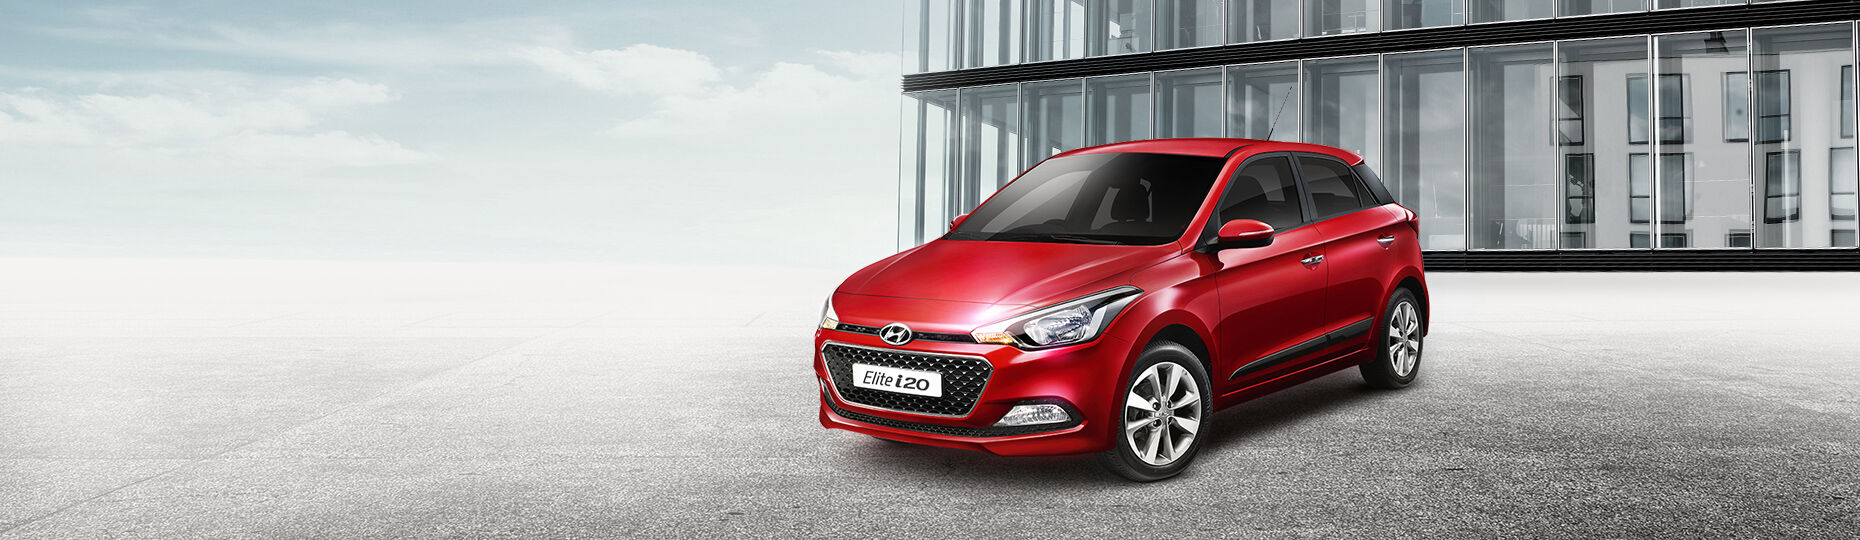 Red color Elite i20 is placed outside with beautiful lake behind